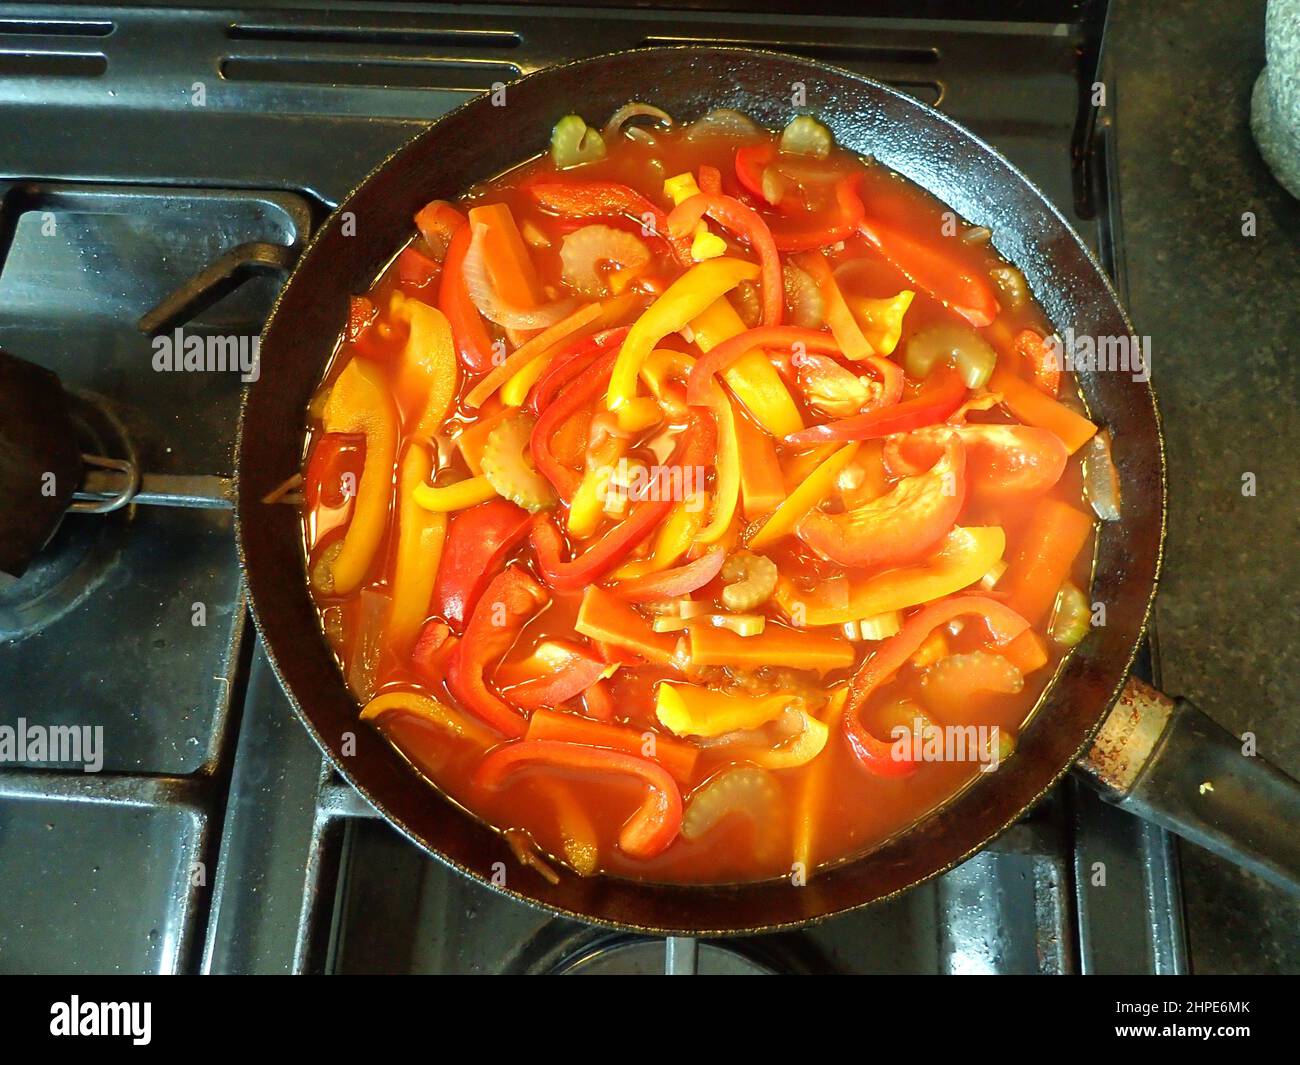 Red and yellow capsicum (bell peppers) form the basis of this summer vegetable dish, simmering in a large frypan on a gas hob Stock Photo